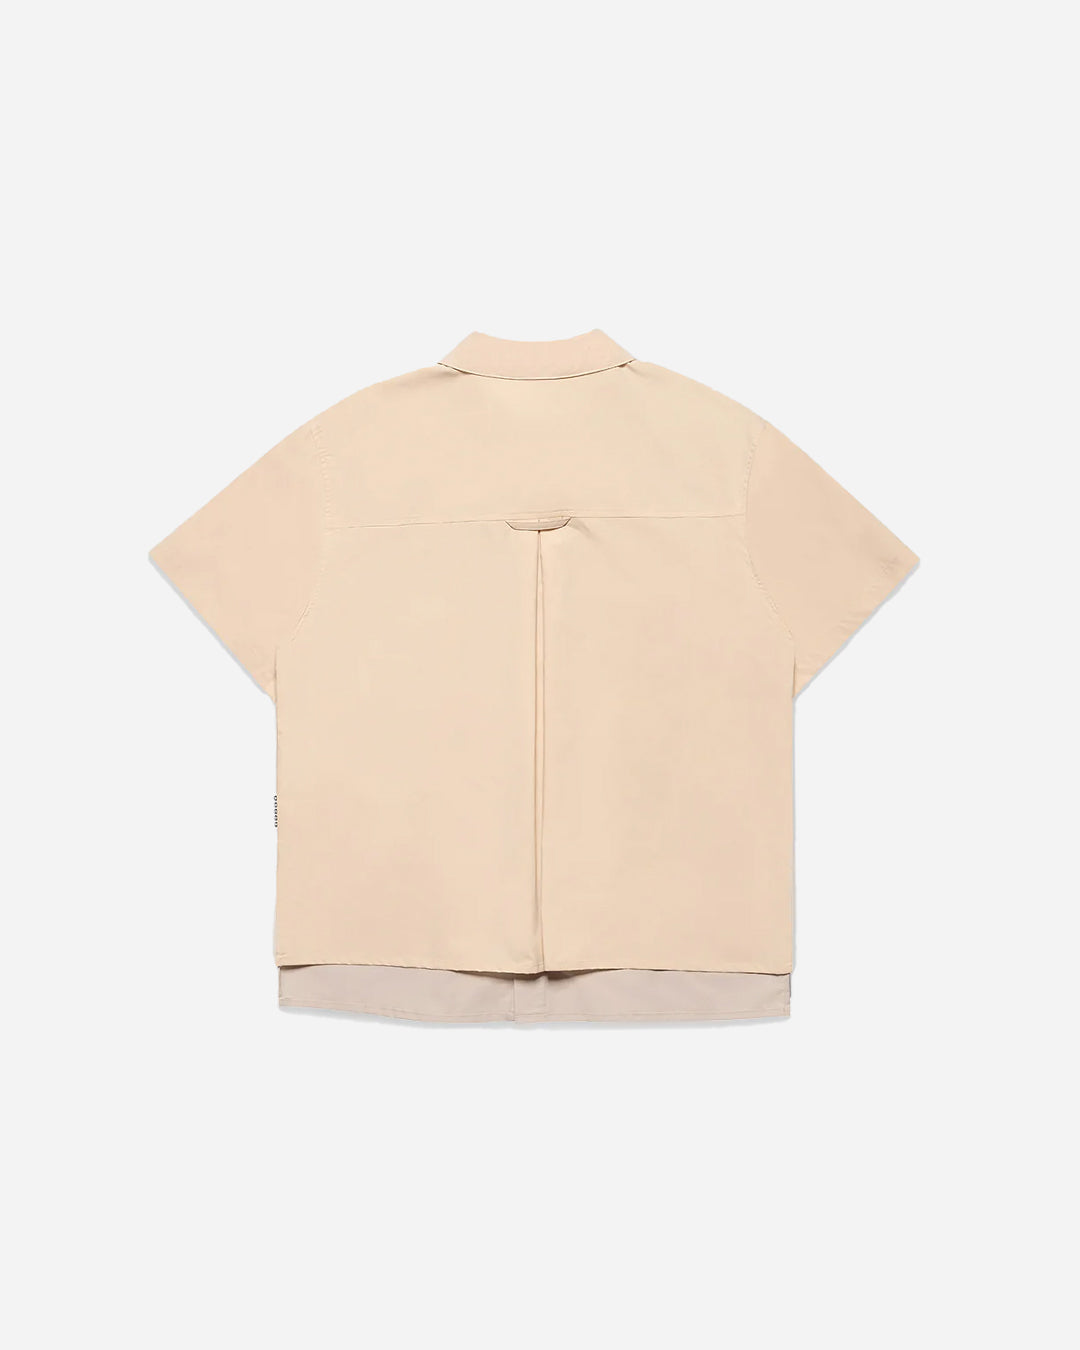 RIPSTOP DOUBLE LAYERED SHIRT